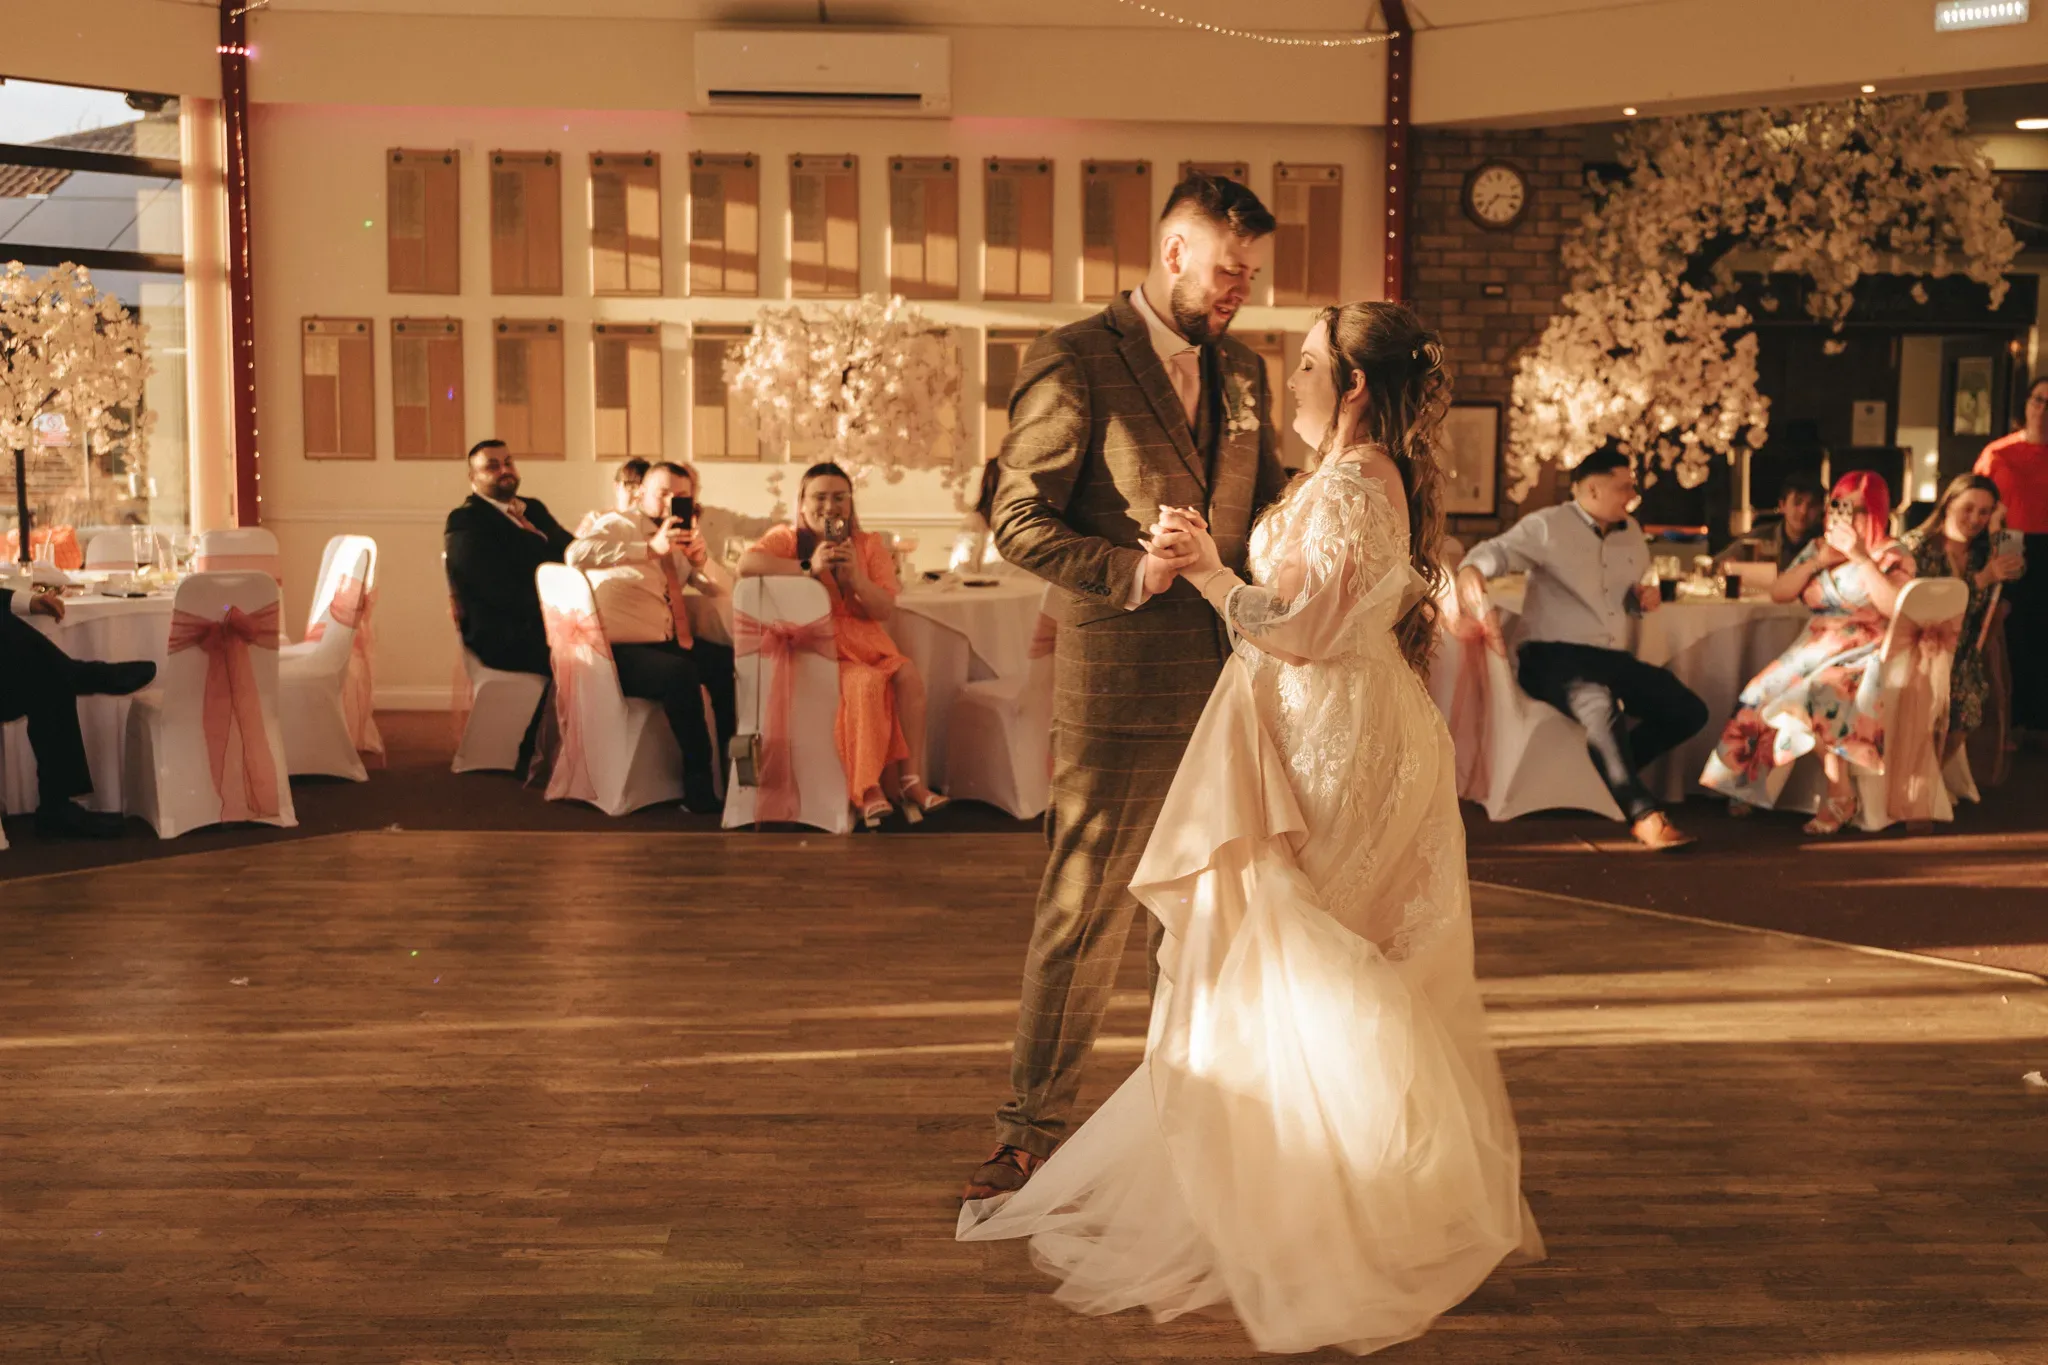 A bride and groom share a dance in a warmly lit hall adorned with white tablecloths and centerpieces of blossoming trees. guests seated around observe the intimate moment. the groom wears a checkered suit, and the bride a white gown.